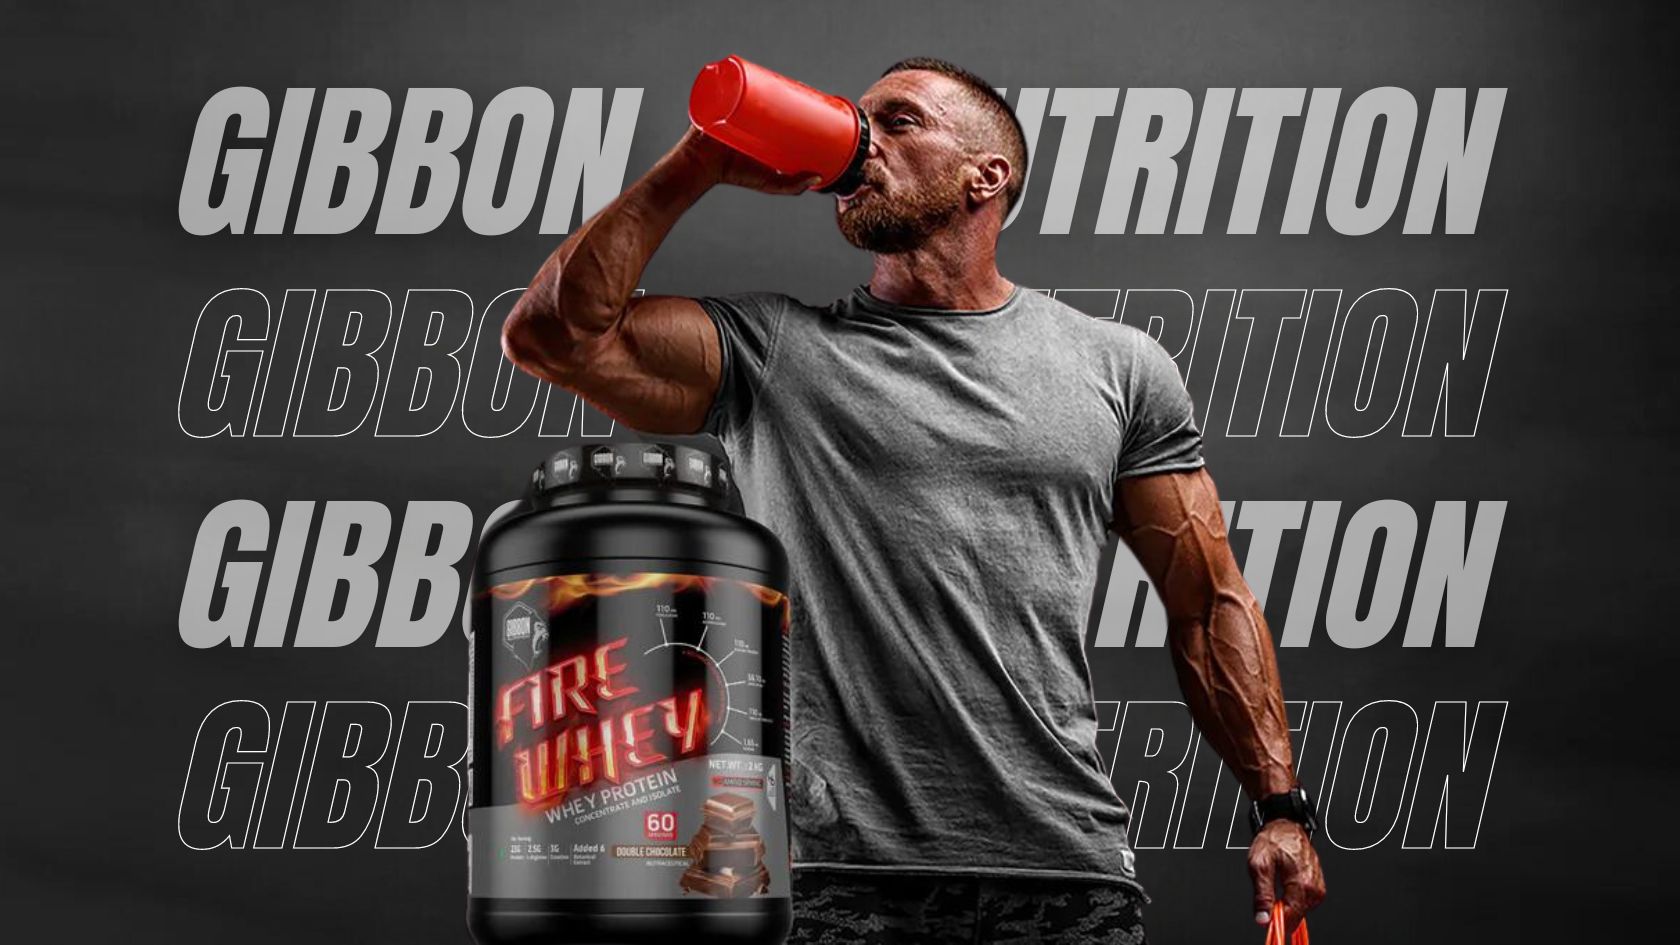 Gibbon Nutrition: A Supplement Brand Conceptualized In America